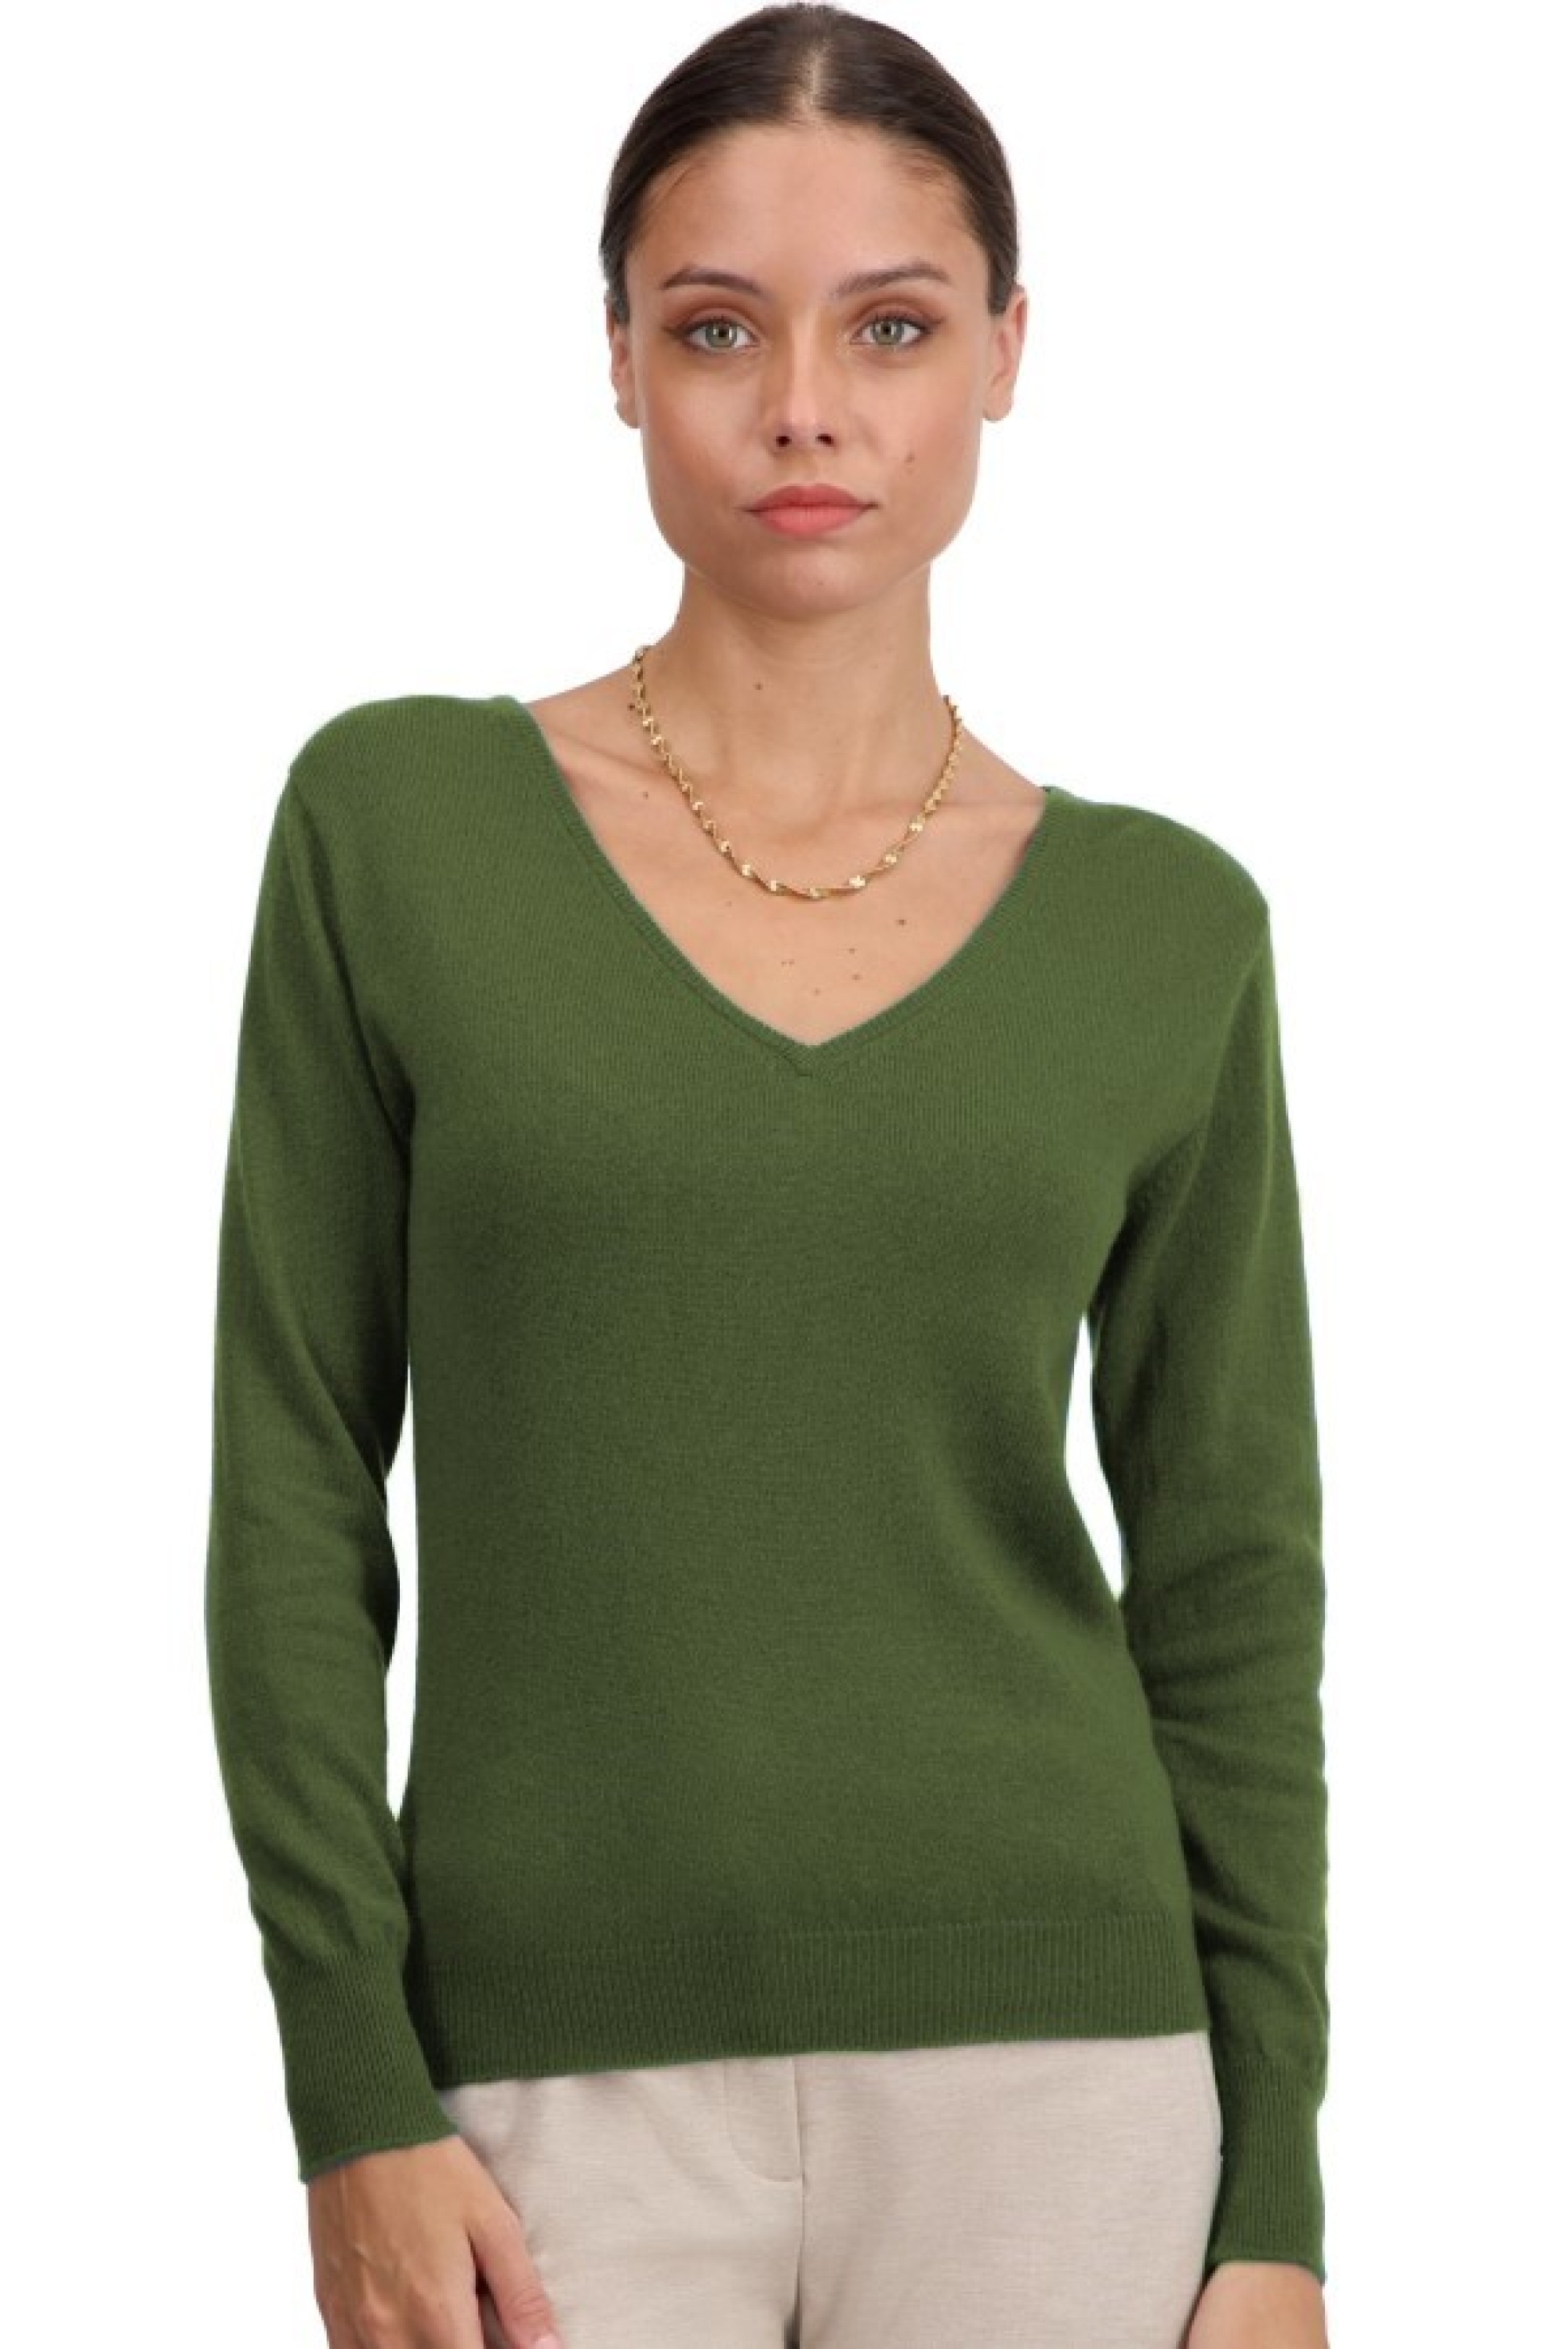 Cashmere ladies basic sweaters at low prices trieste first olive m